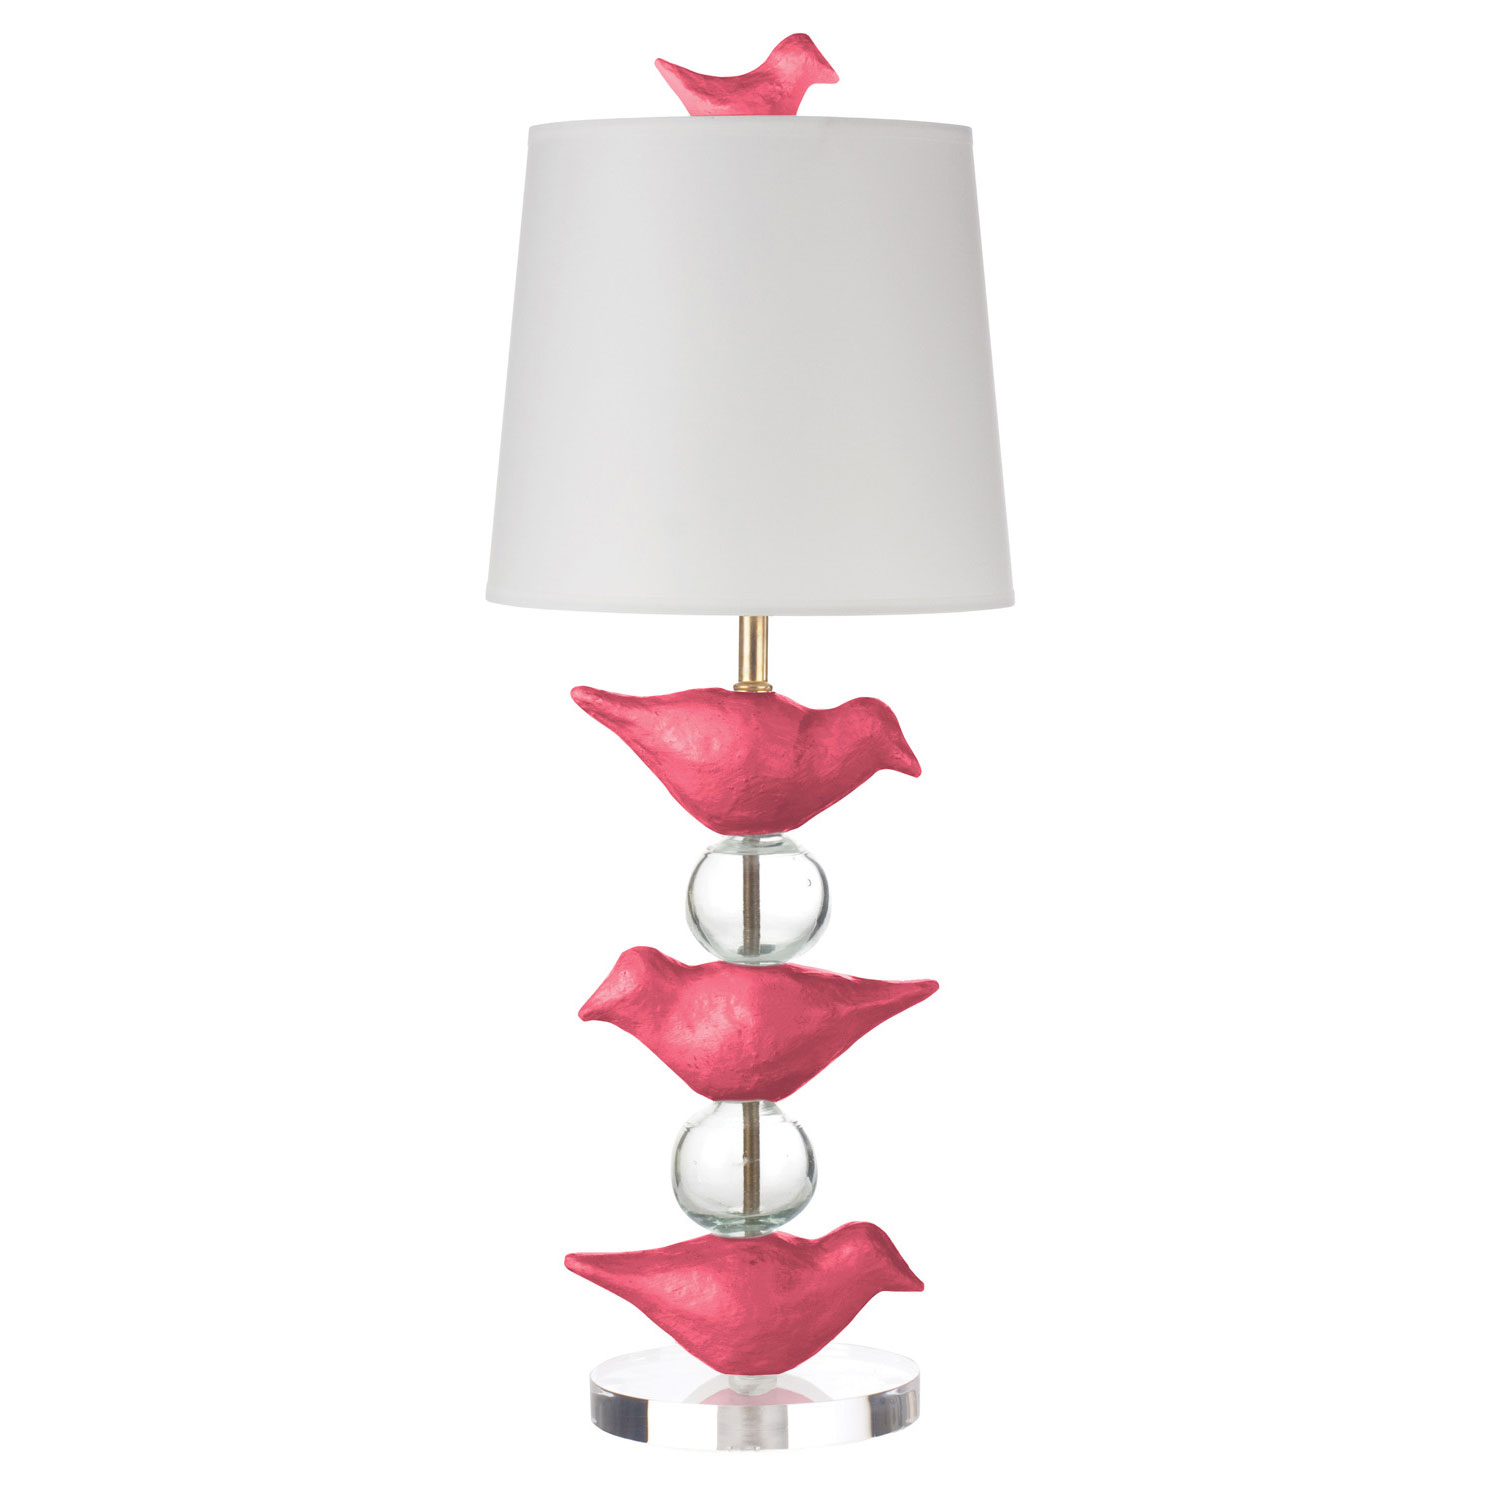 pink table lamp photo - 1